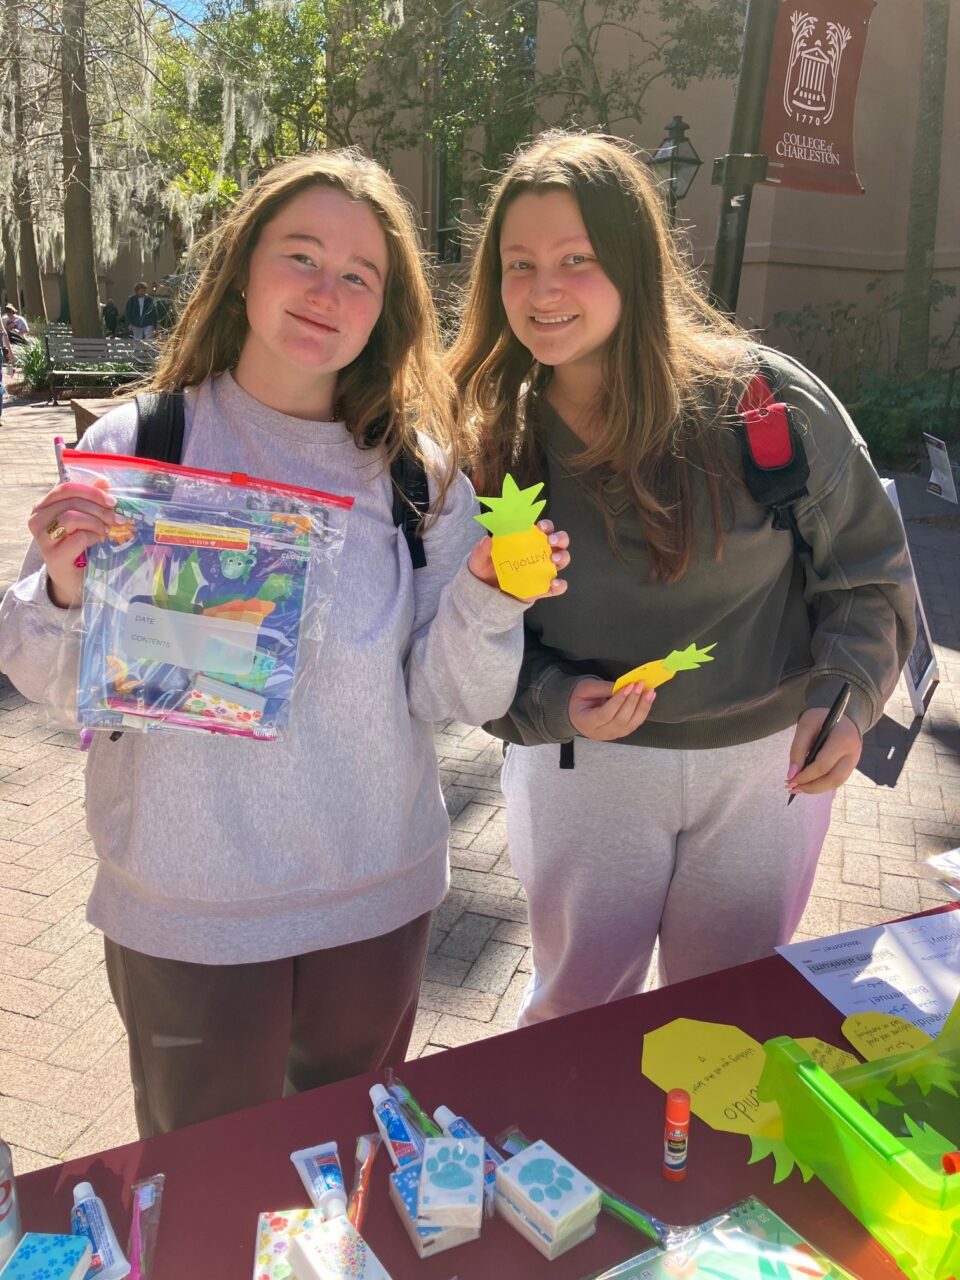 Dozens of students joined us for our Pop-Up Service event with Lutheran Carolina Services on Wednesday, 2/21, and helped assemble ‘Welcome to Charleston’ kits for refugees who are resettling in the area. The kits included hygiene and food items. Students also assembled hygiene and activity kits for young refugees.